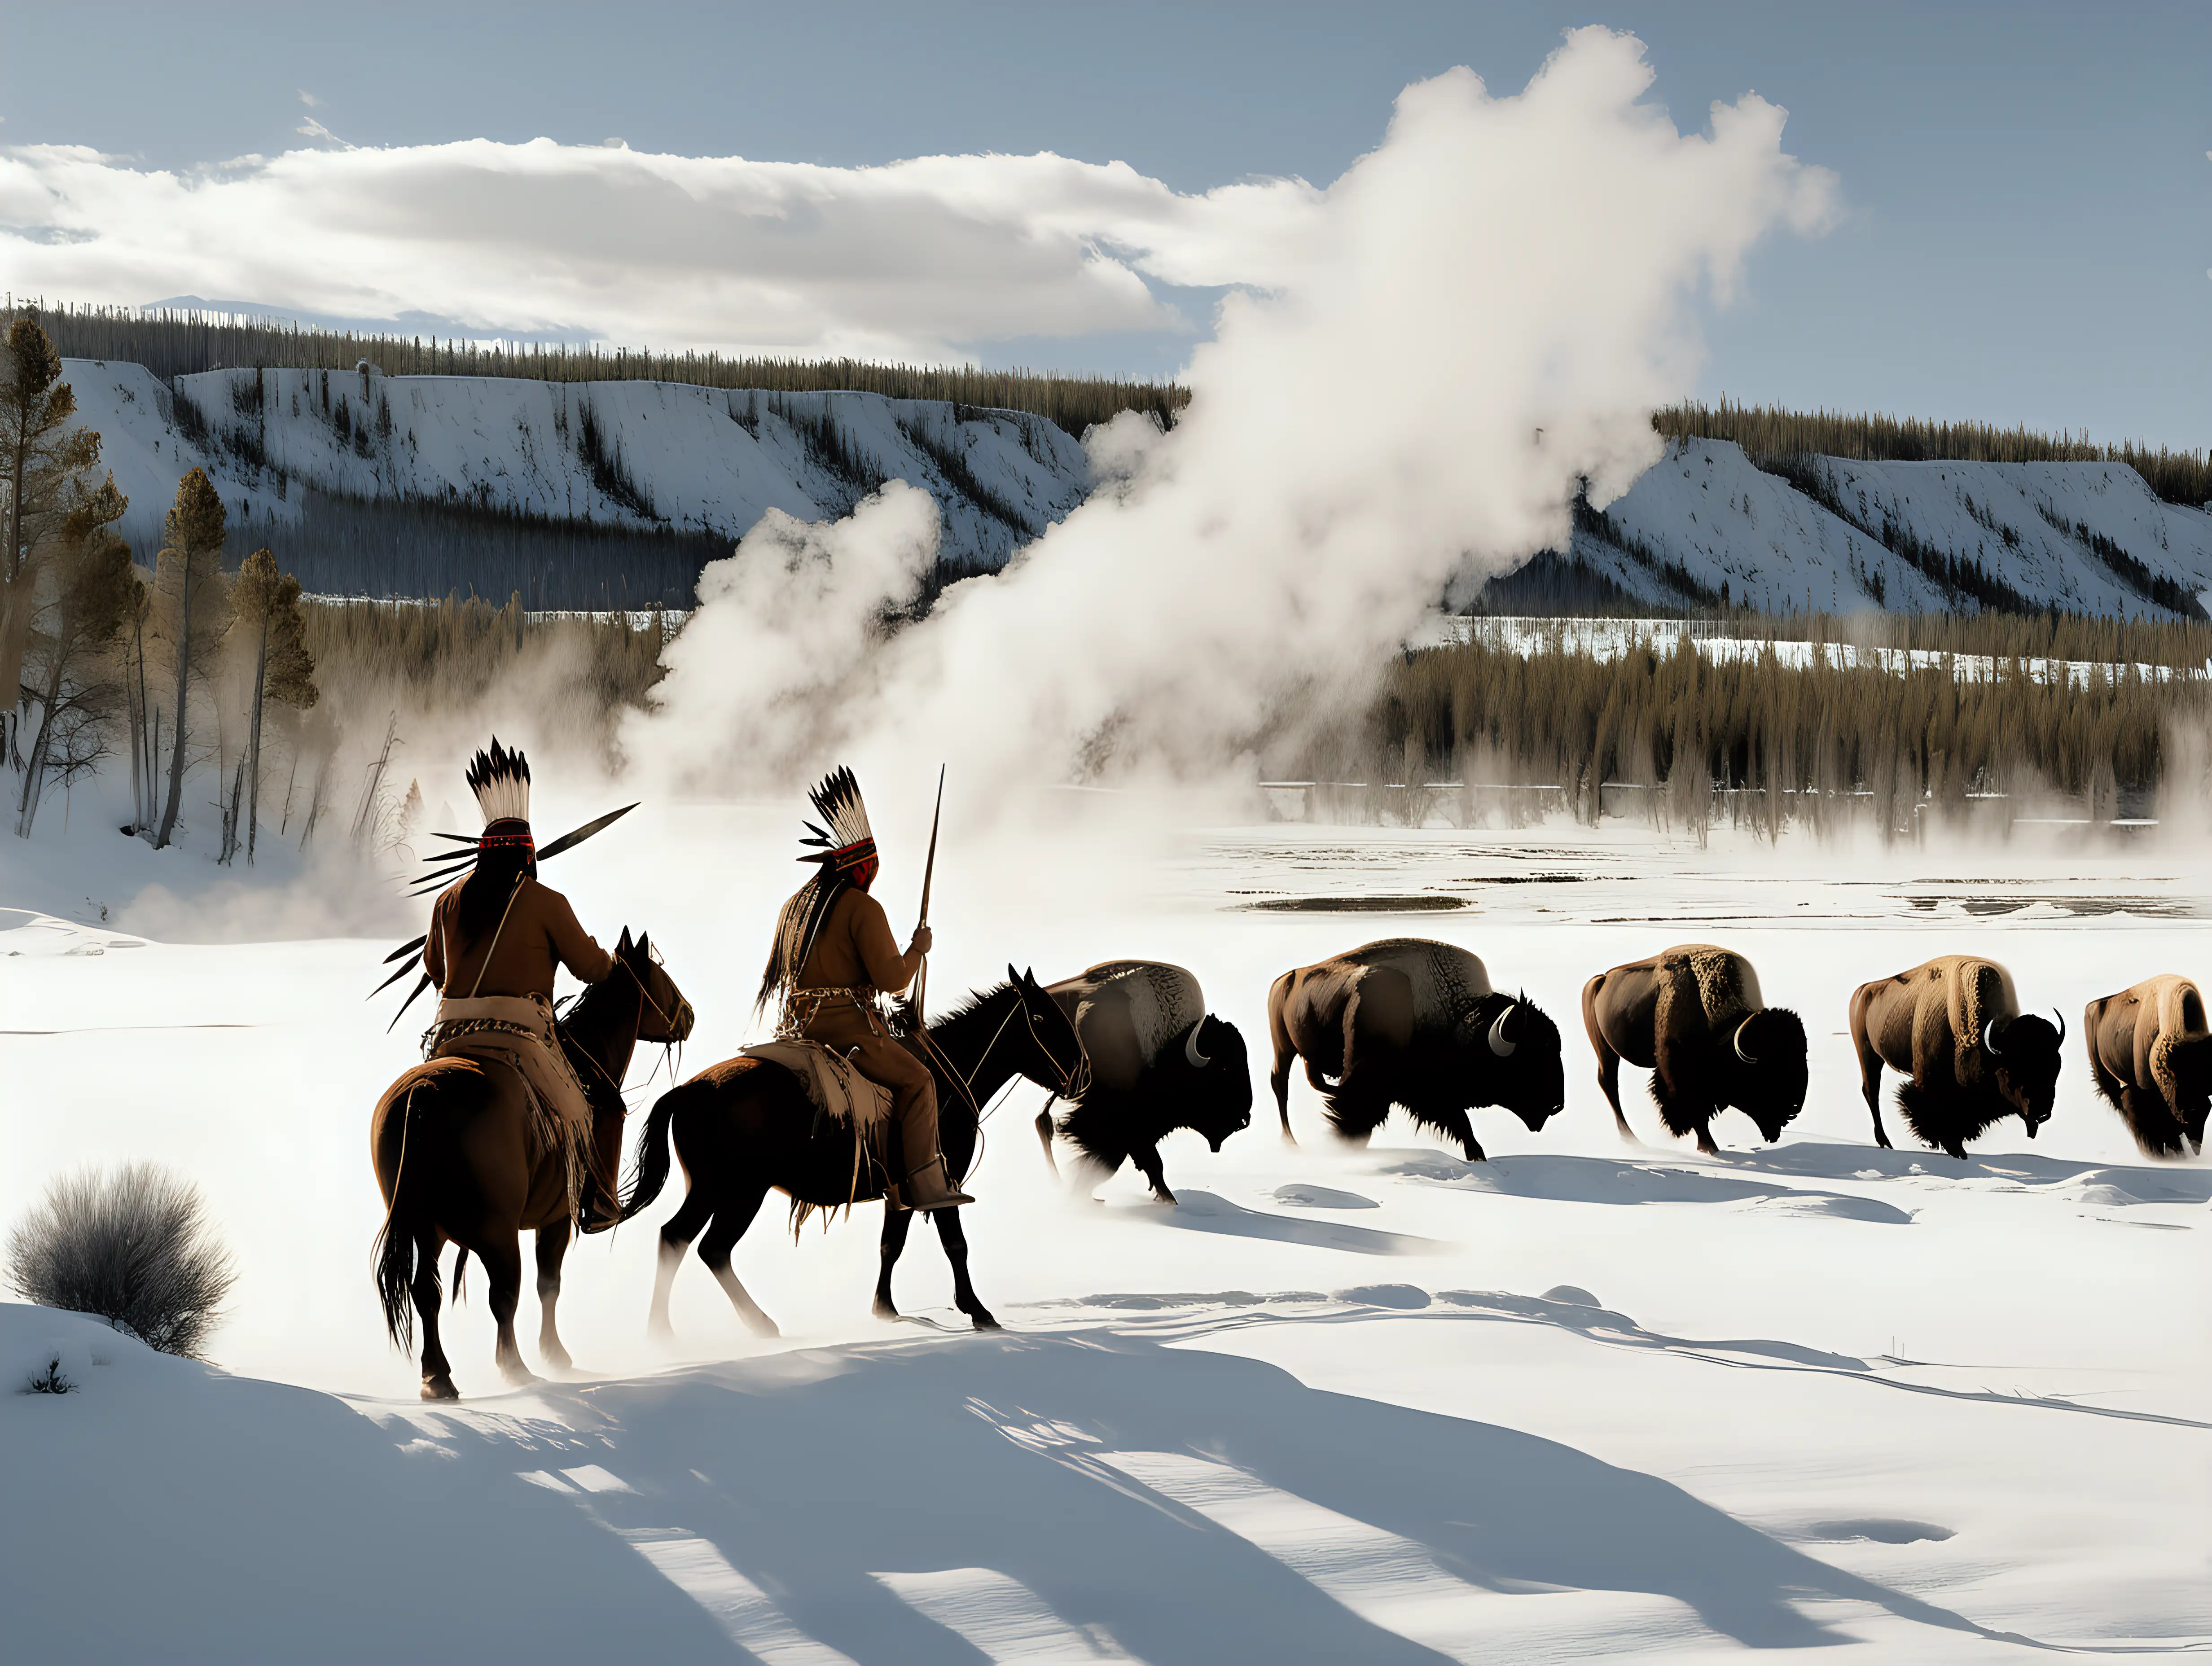 native americans on horseback hunting buffalo in Yellowstone in the winter 